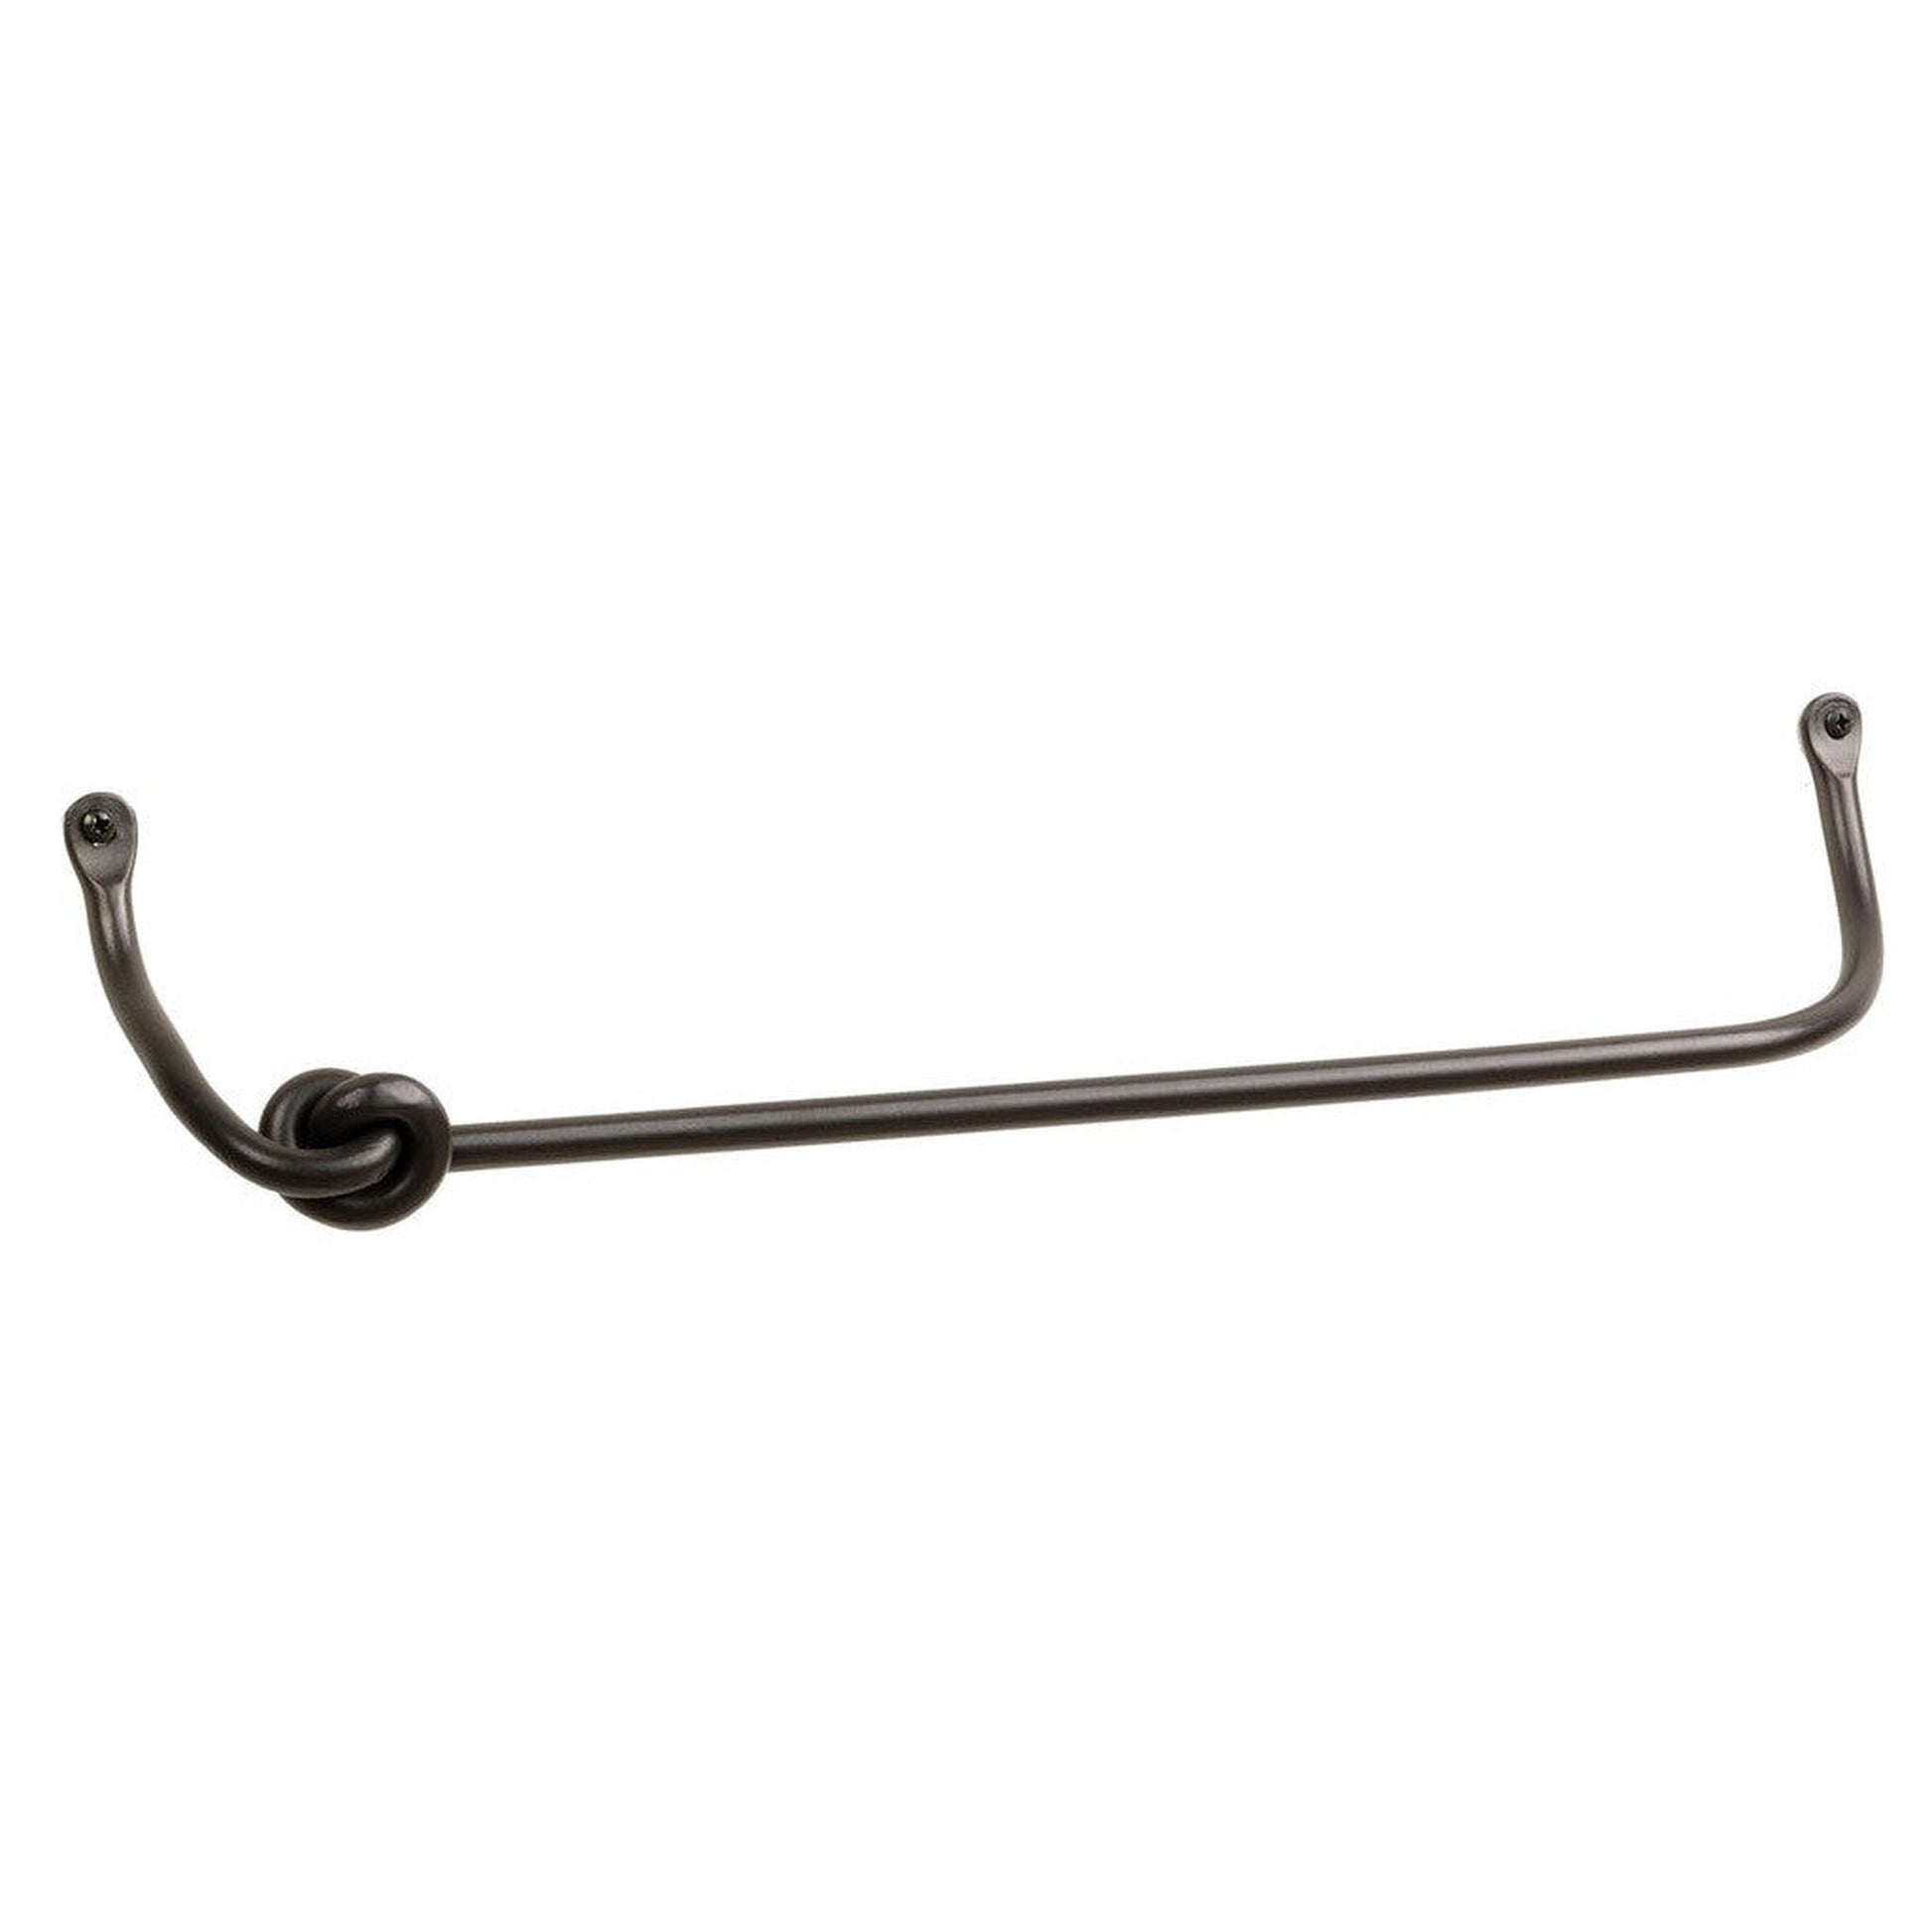 Stone County Ironworks Knot 16" Natural Black Iron Towel Bar With Copper Iron Accent